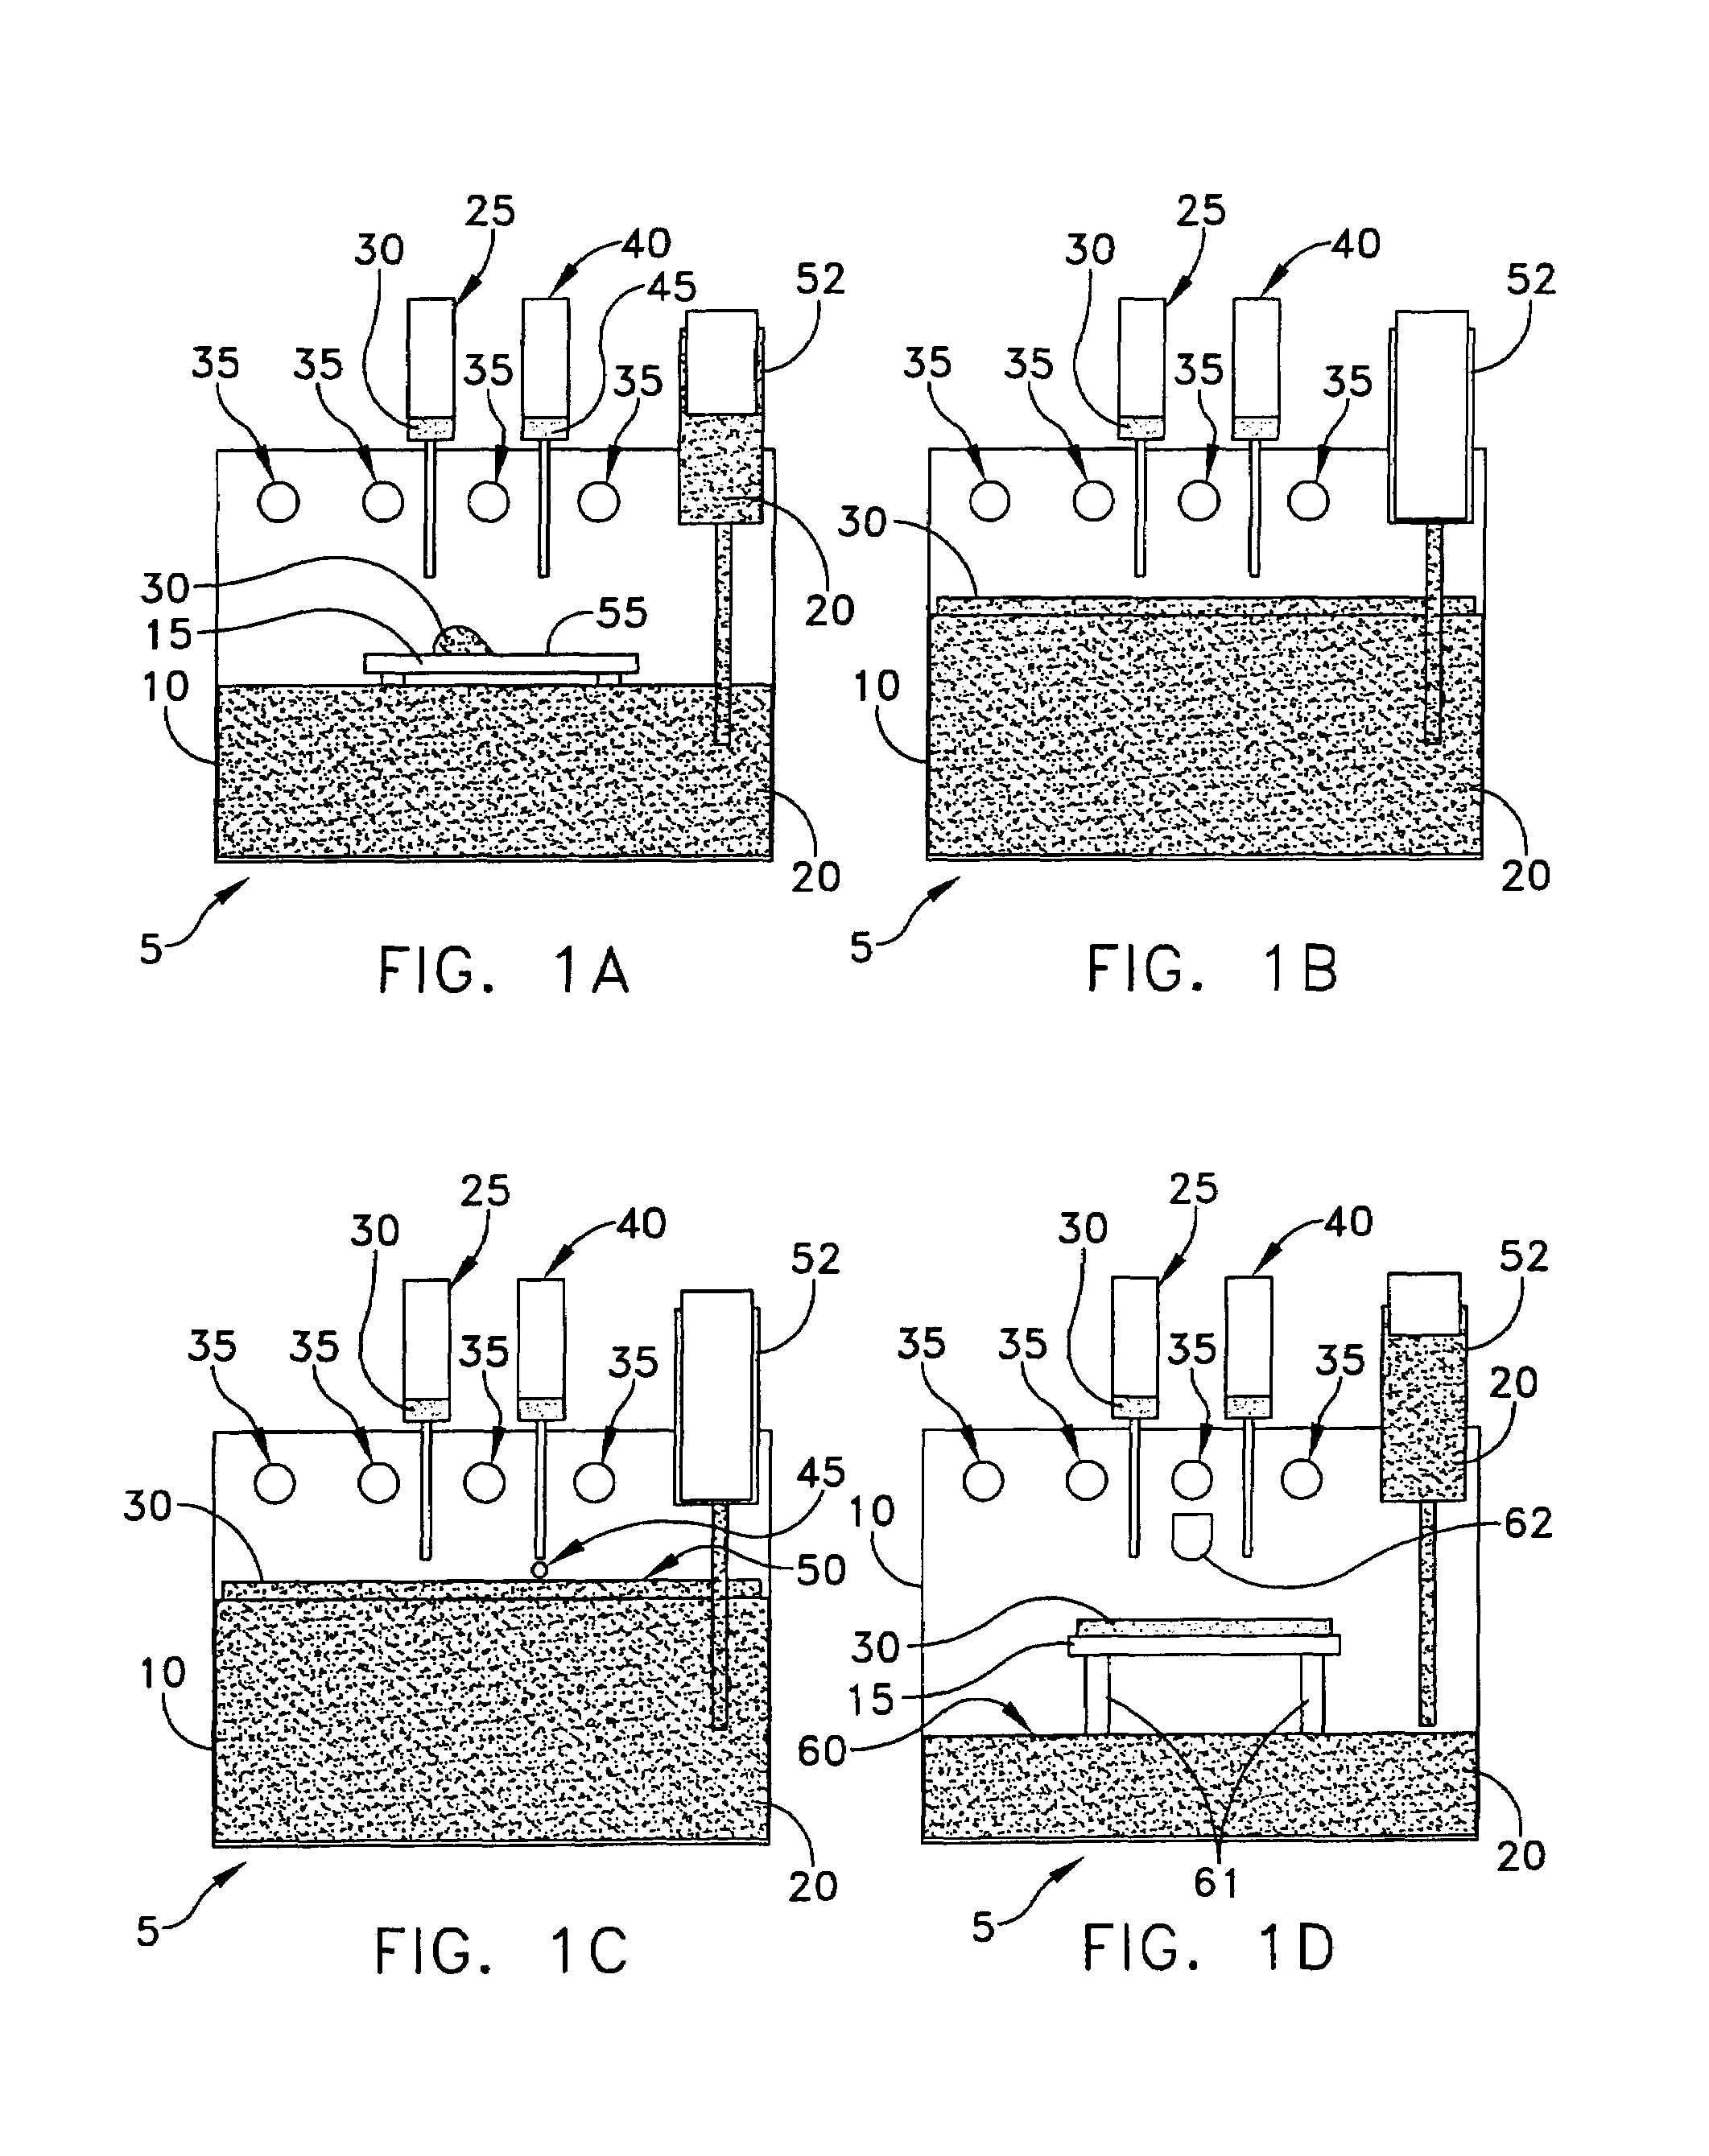 Apparatus and method for nanoscale pattern generation